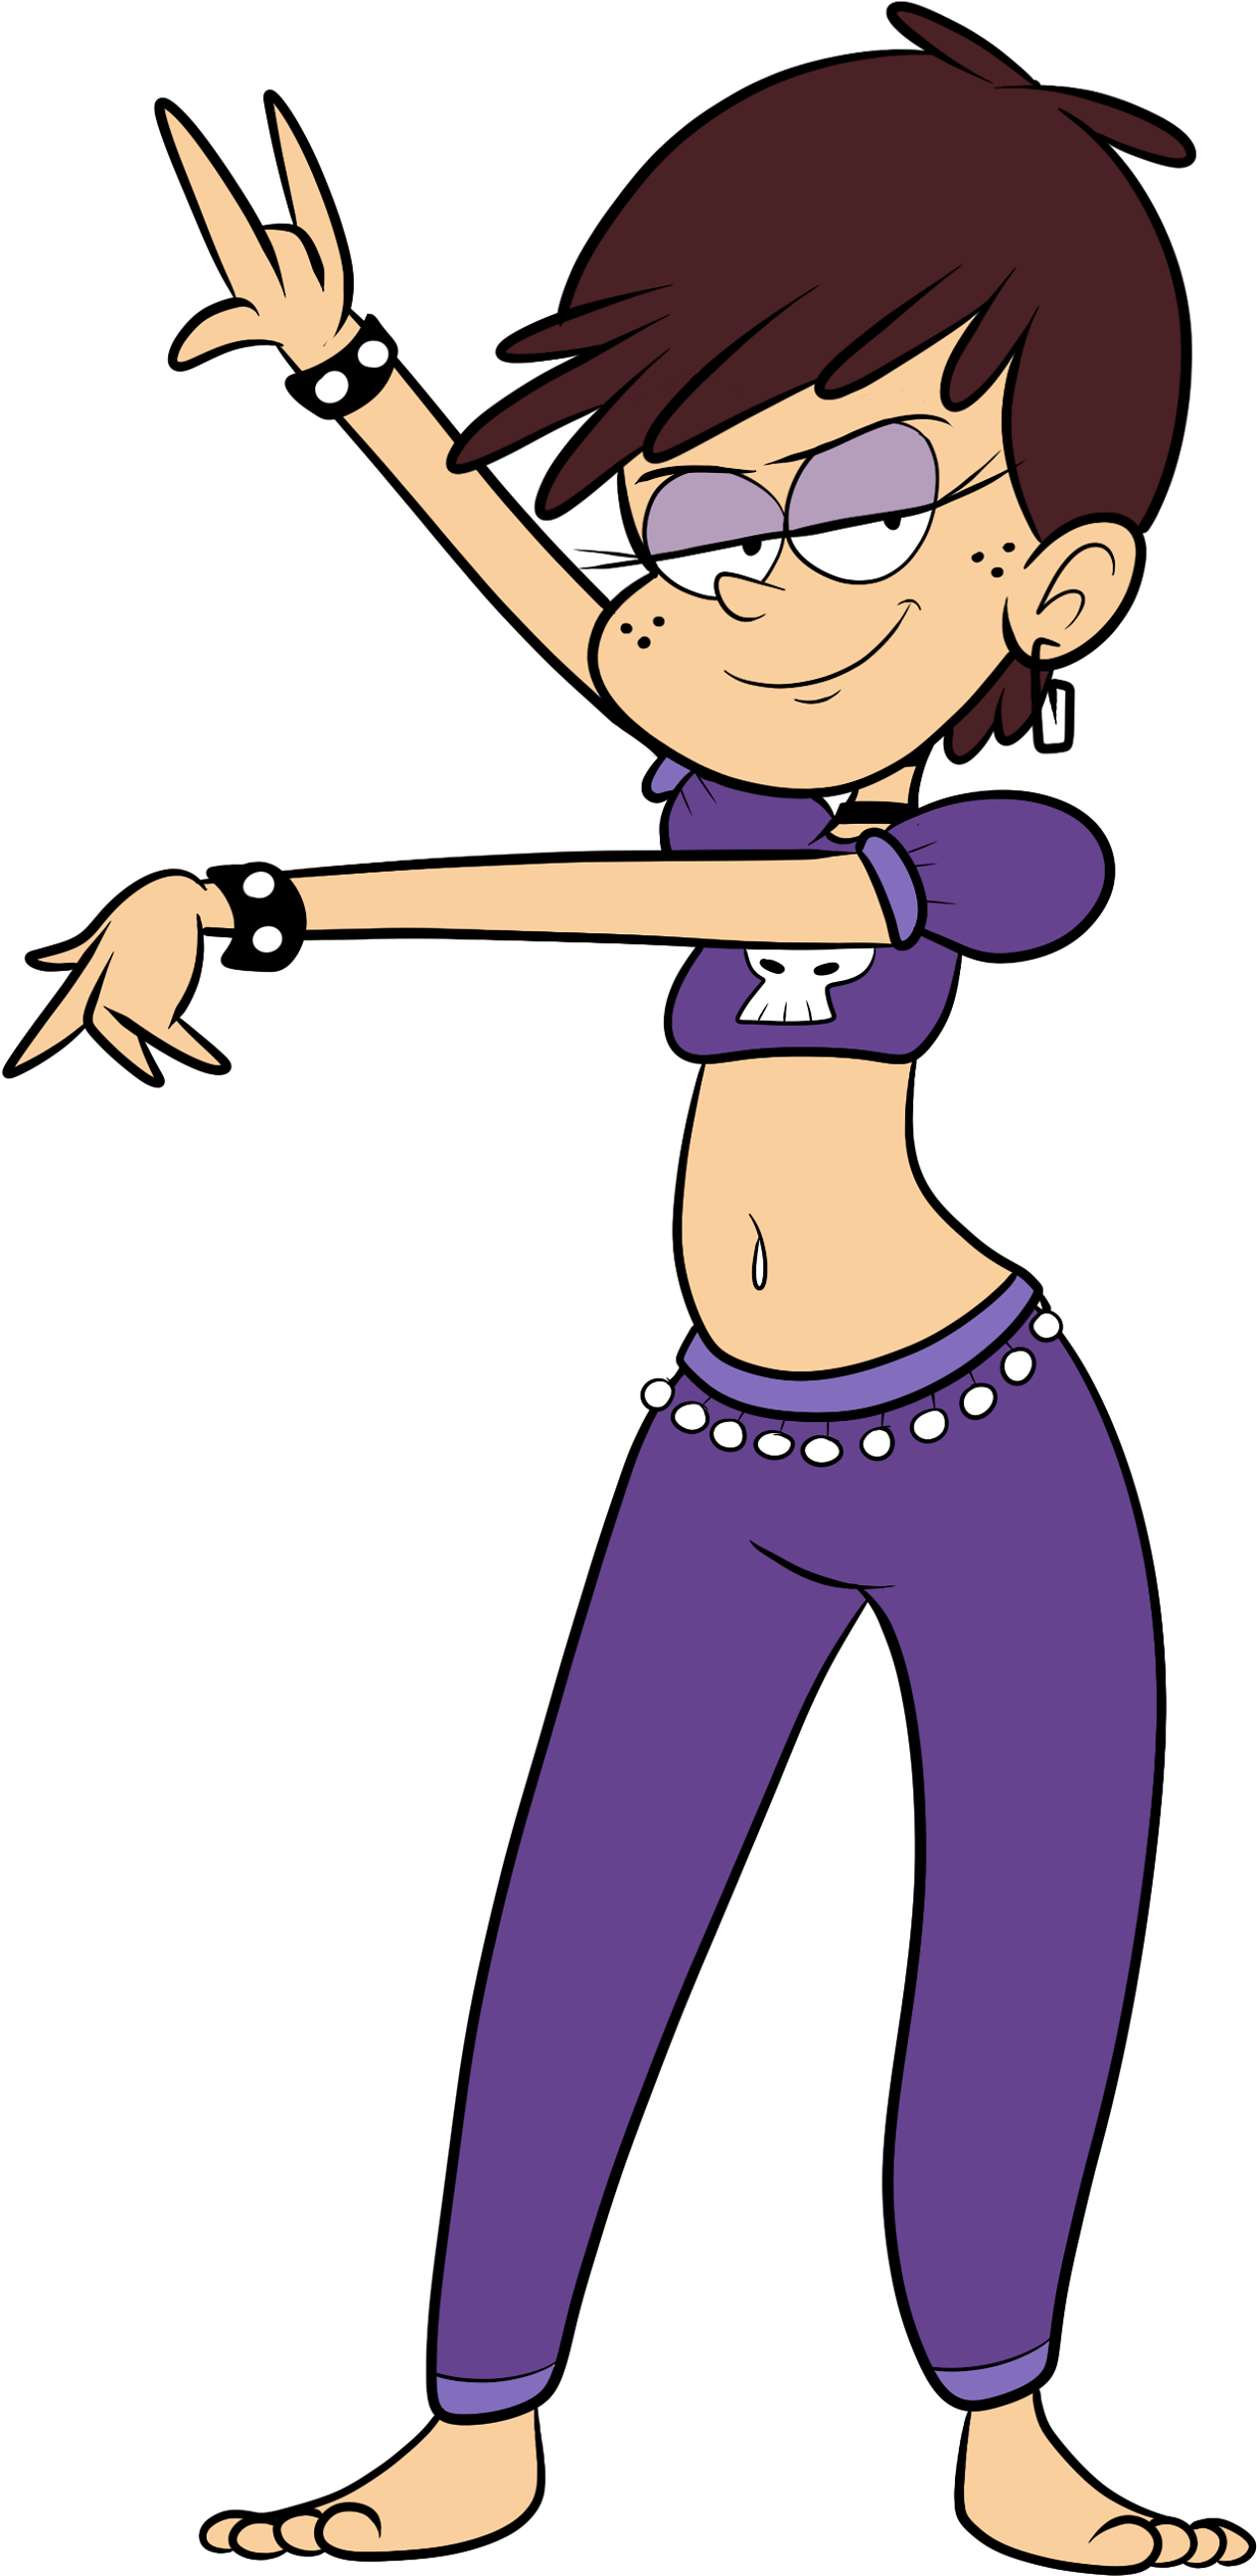 Download and share clipart about Luna The Belly Dancer By Sb99stuff On Devi...